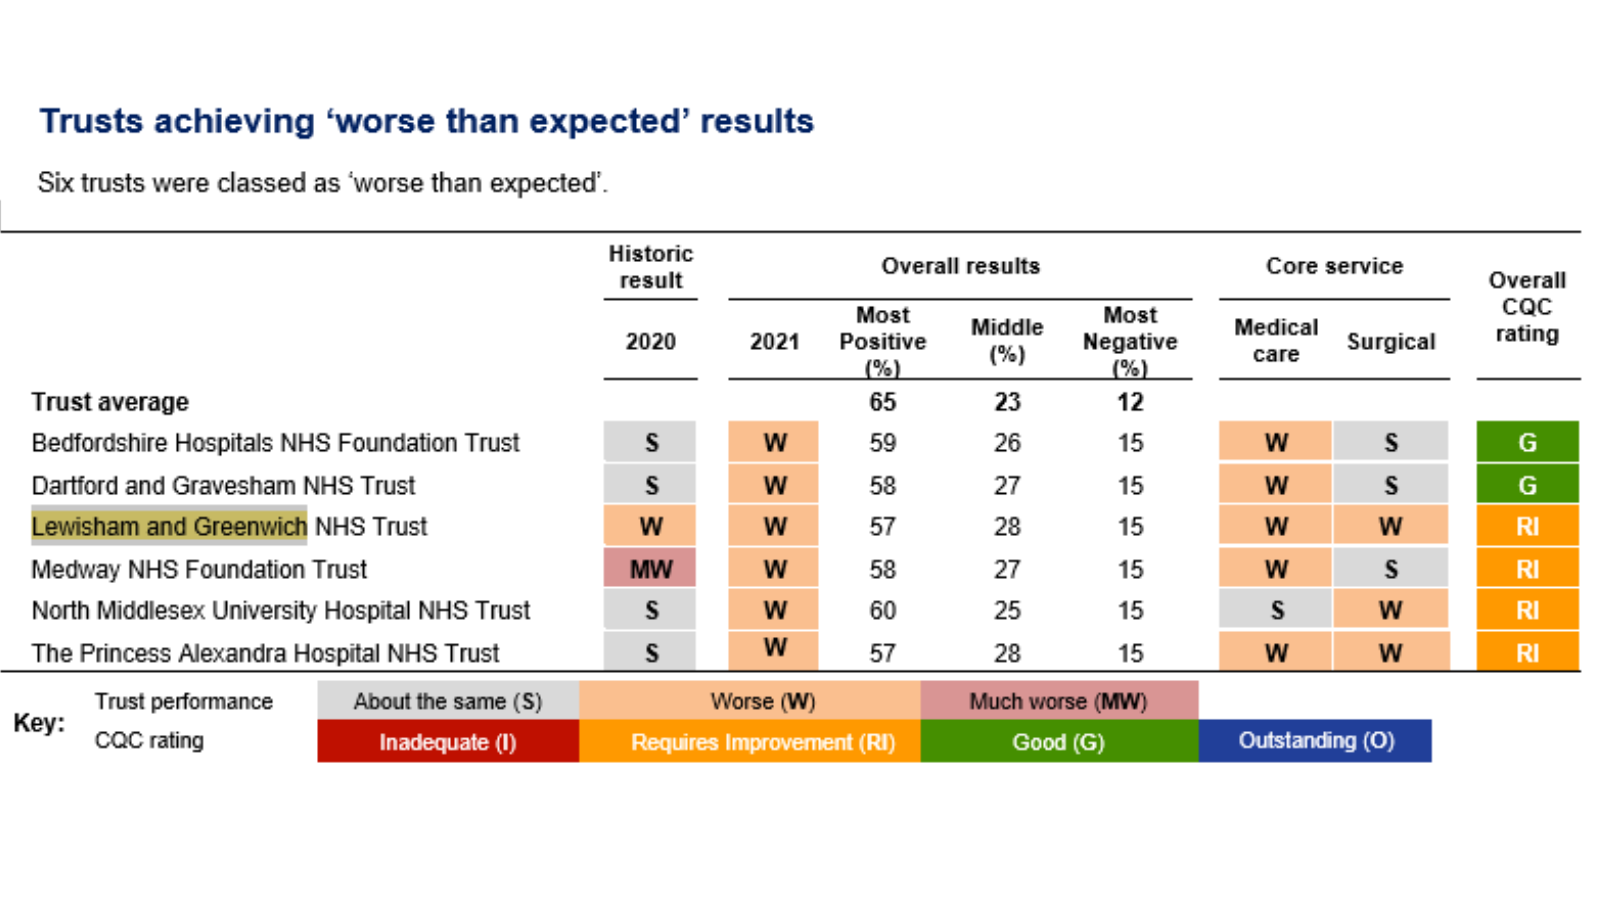 Table showing results across NHS trusts